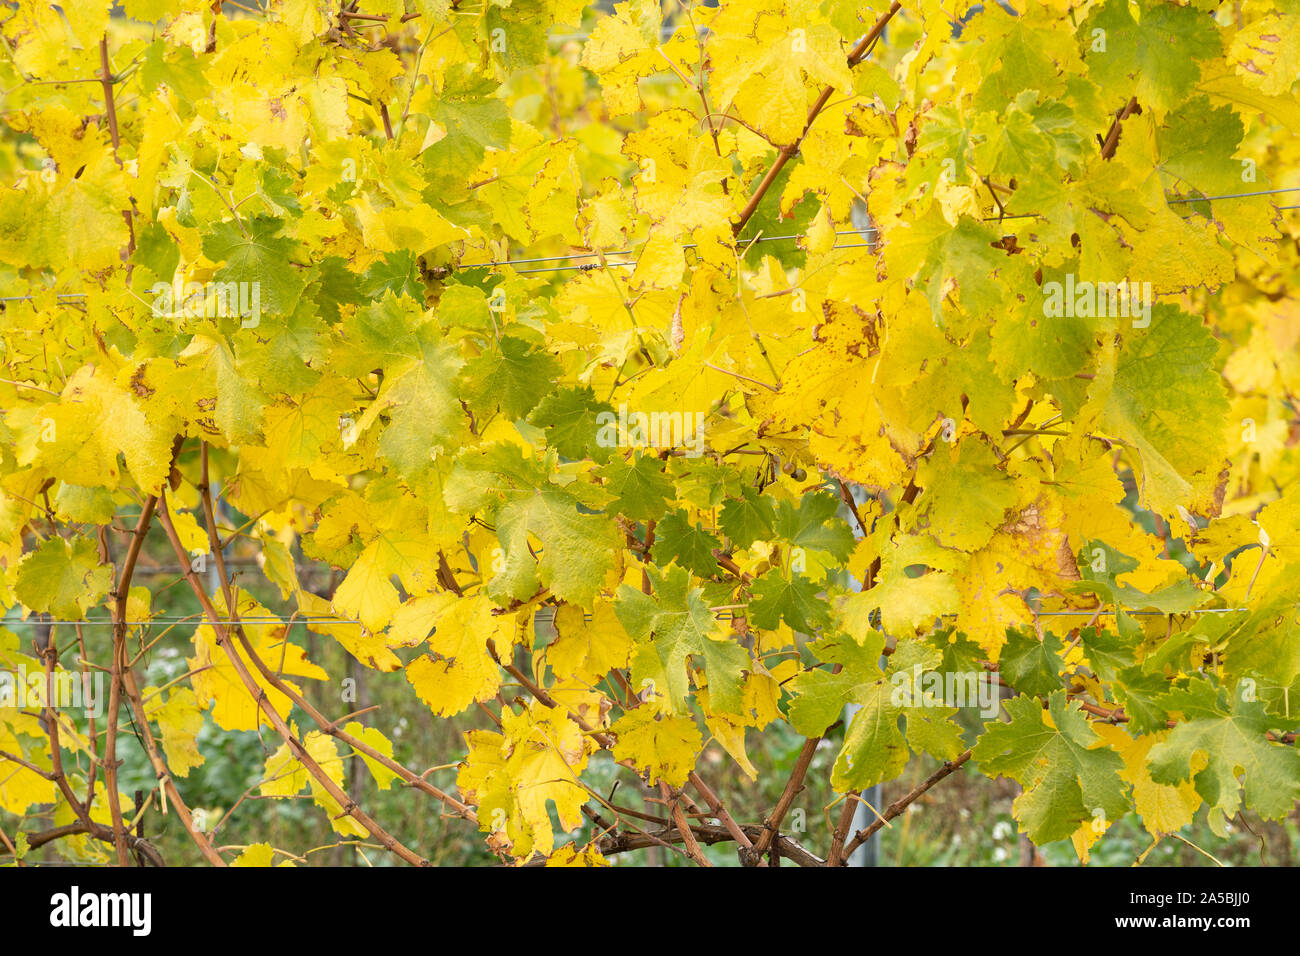 A background of green and yellow leaves of the European grapevine (Vitis vinifera) in autumn in Lower Austria Stock Photo